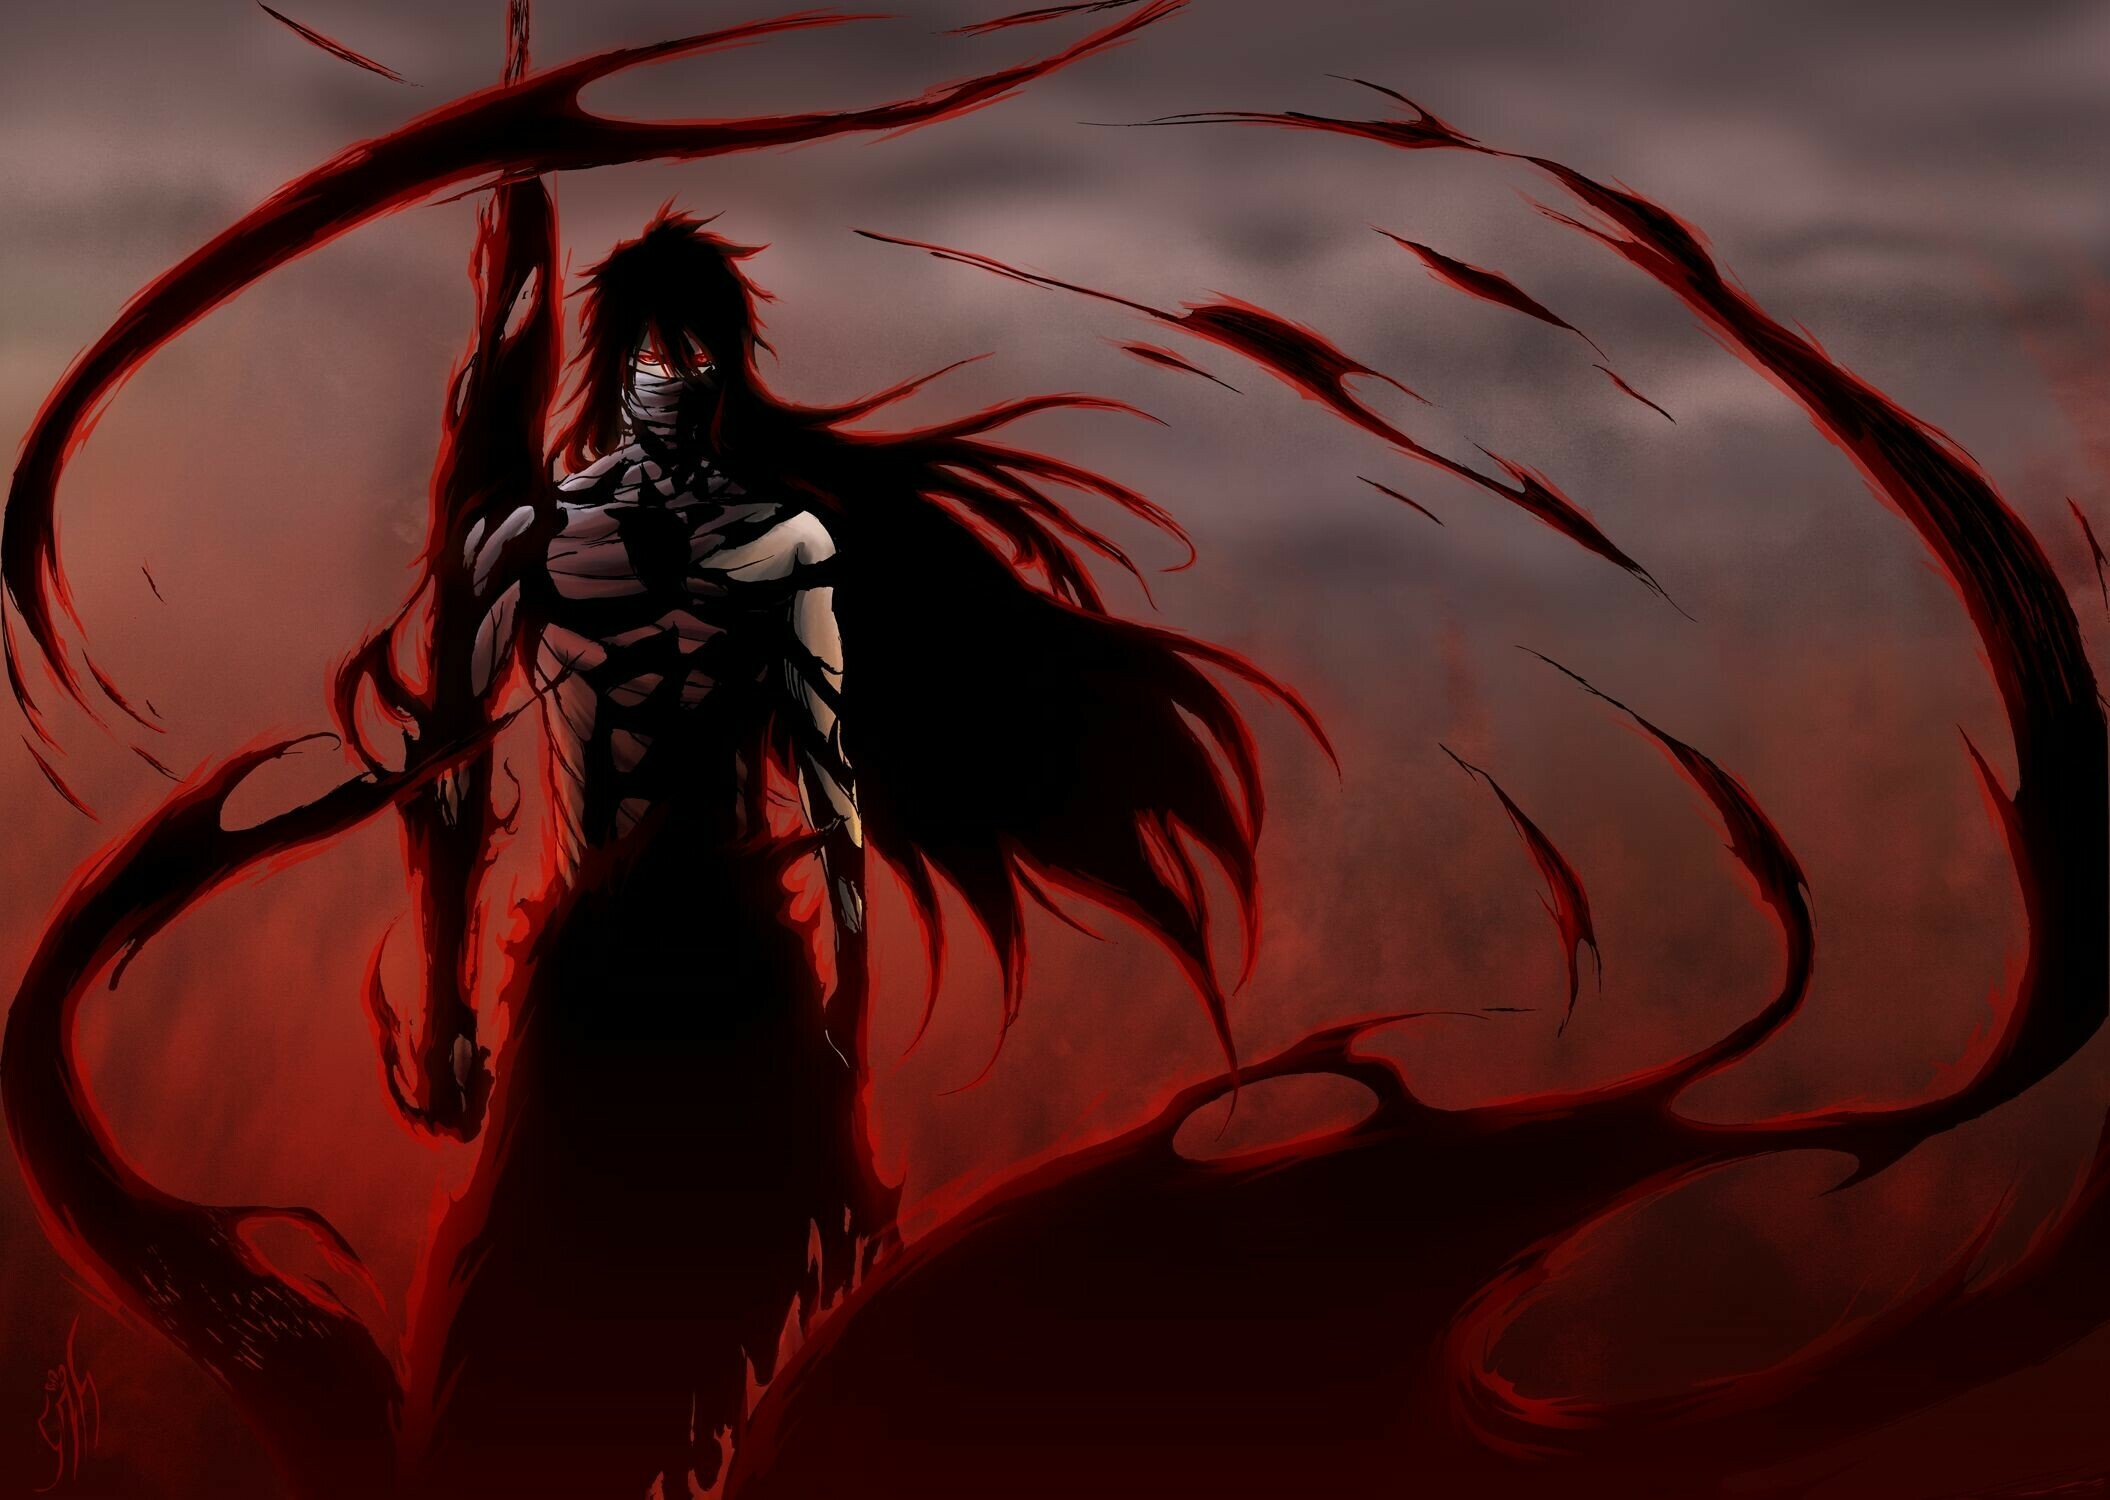 Bleach: The story follows the adventures of Ichigo Kurosaki after he obtains the powers of a Soul Reaper. 2110x1500 HD Background.